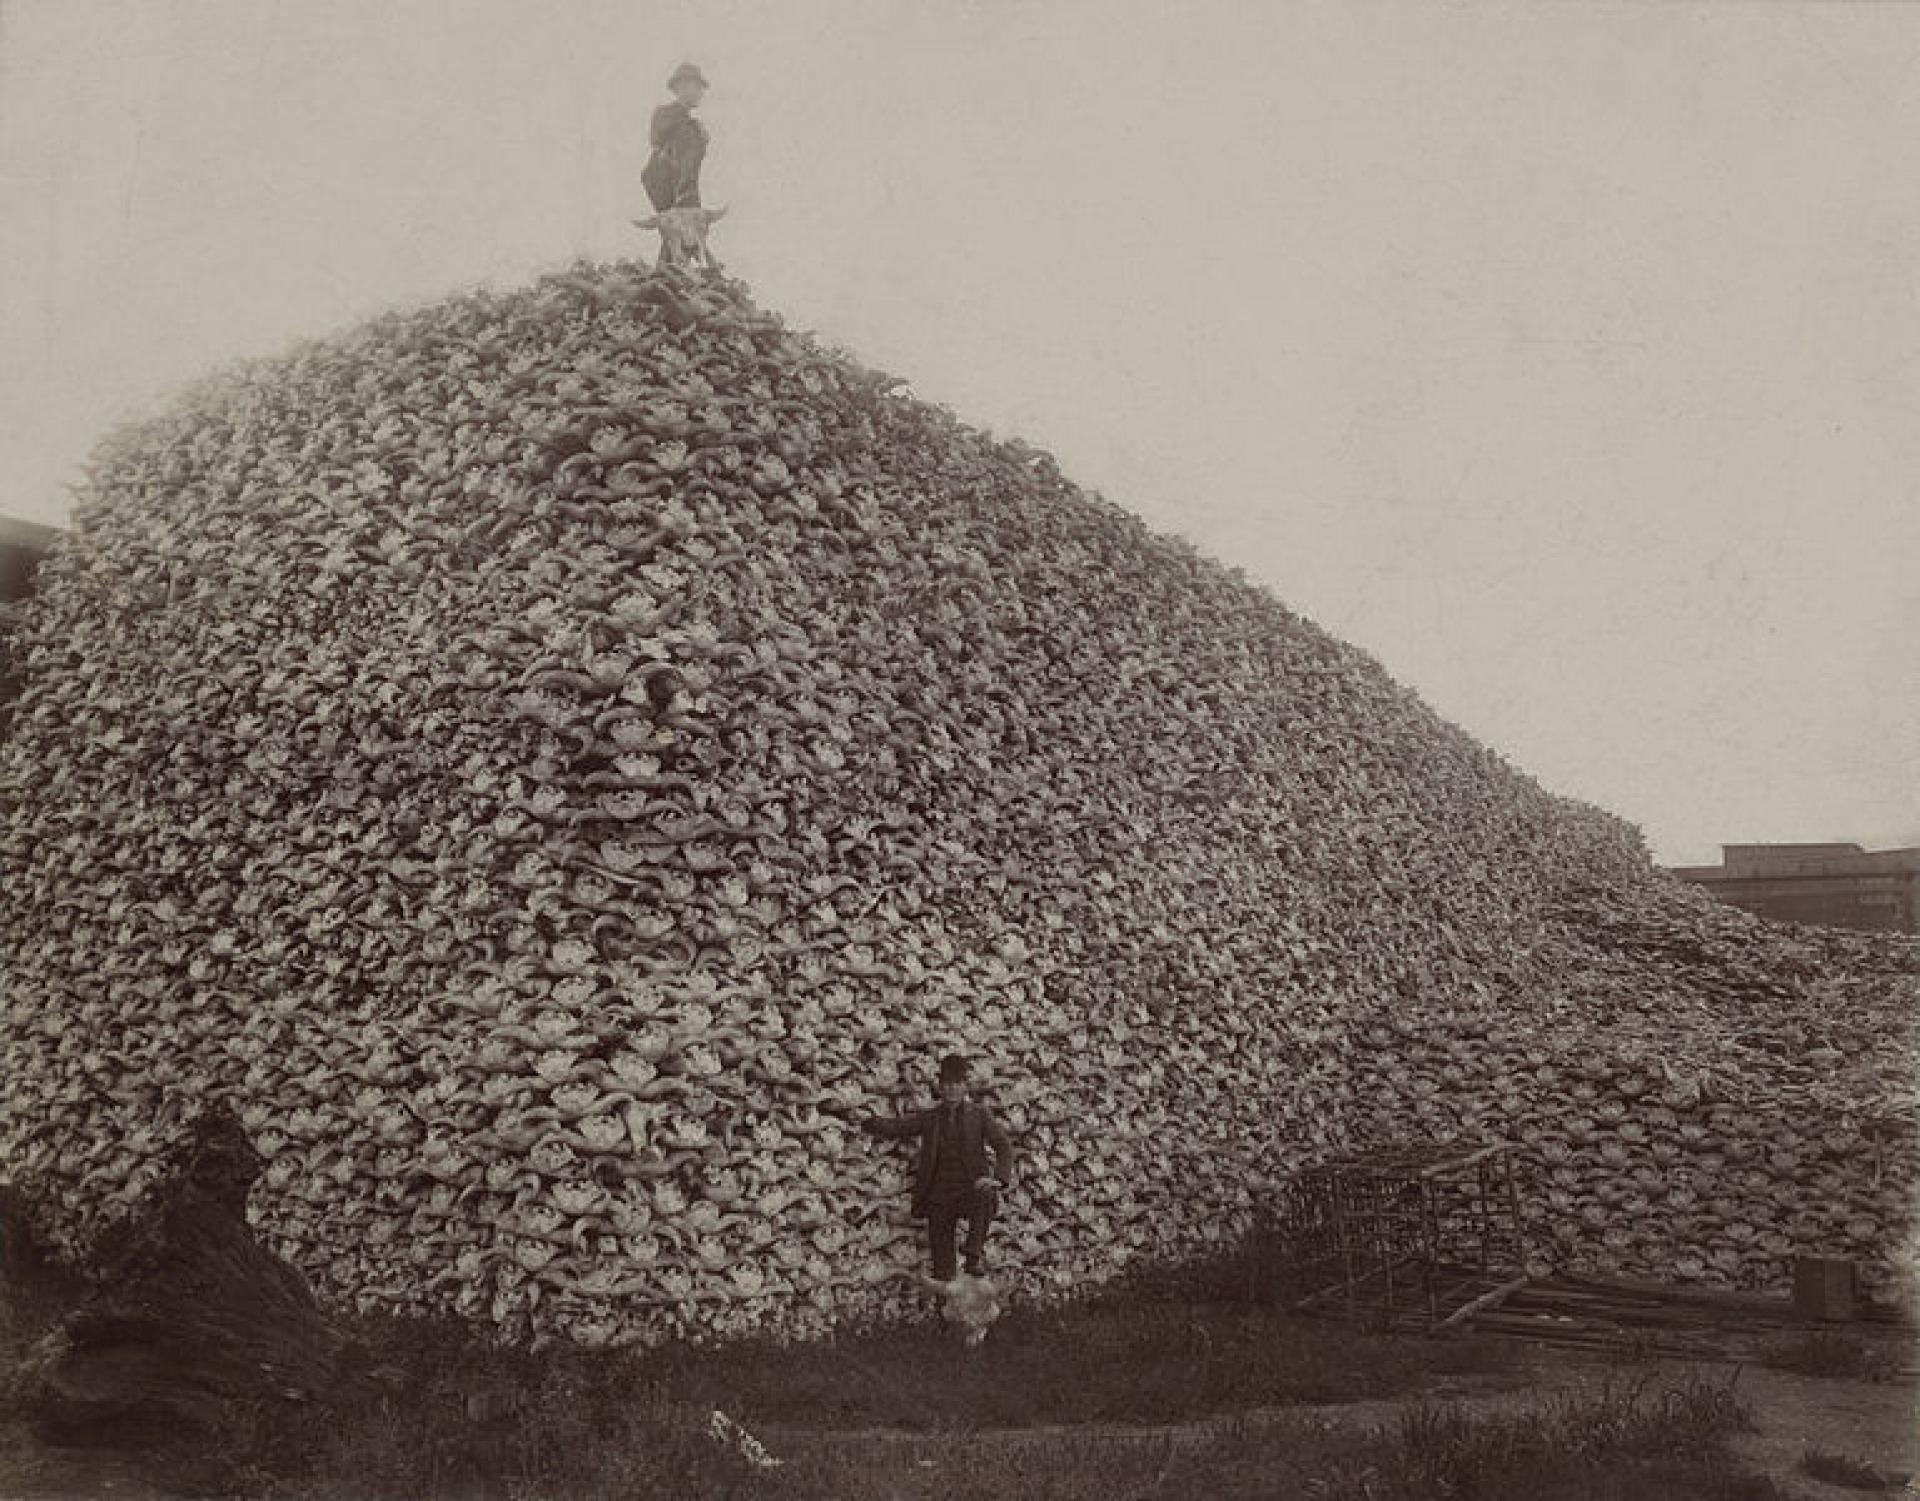 Image: Photograph from the mid-1870s of a pile of American bison skulls waiting to be ground for fertilizer. Detroit Public Library, Burton Historical Collection.